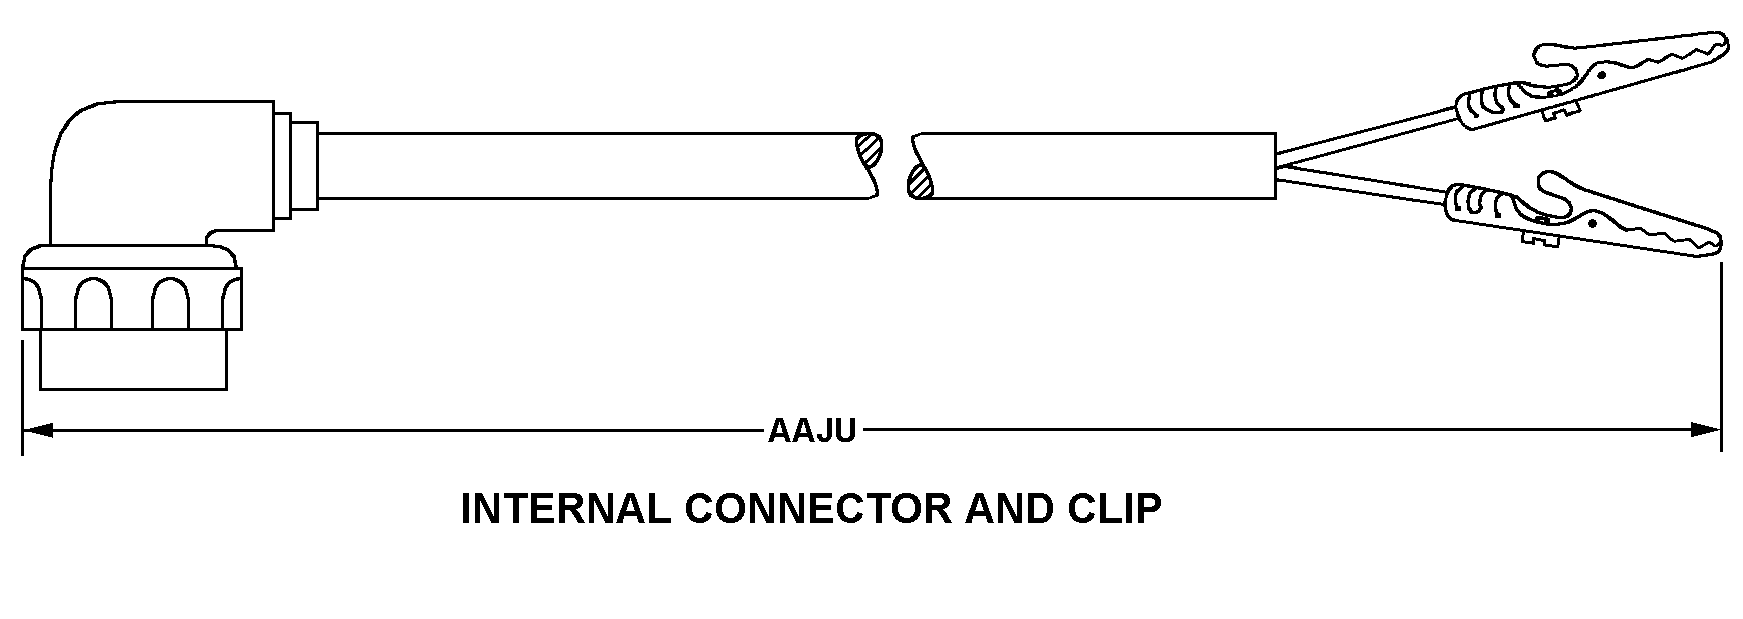 INTERNAL CONNECTOR AND CLIP style nsn 6150-01-247-0102